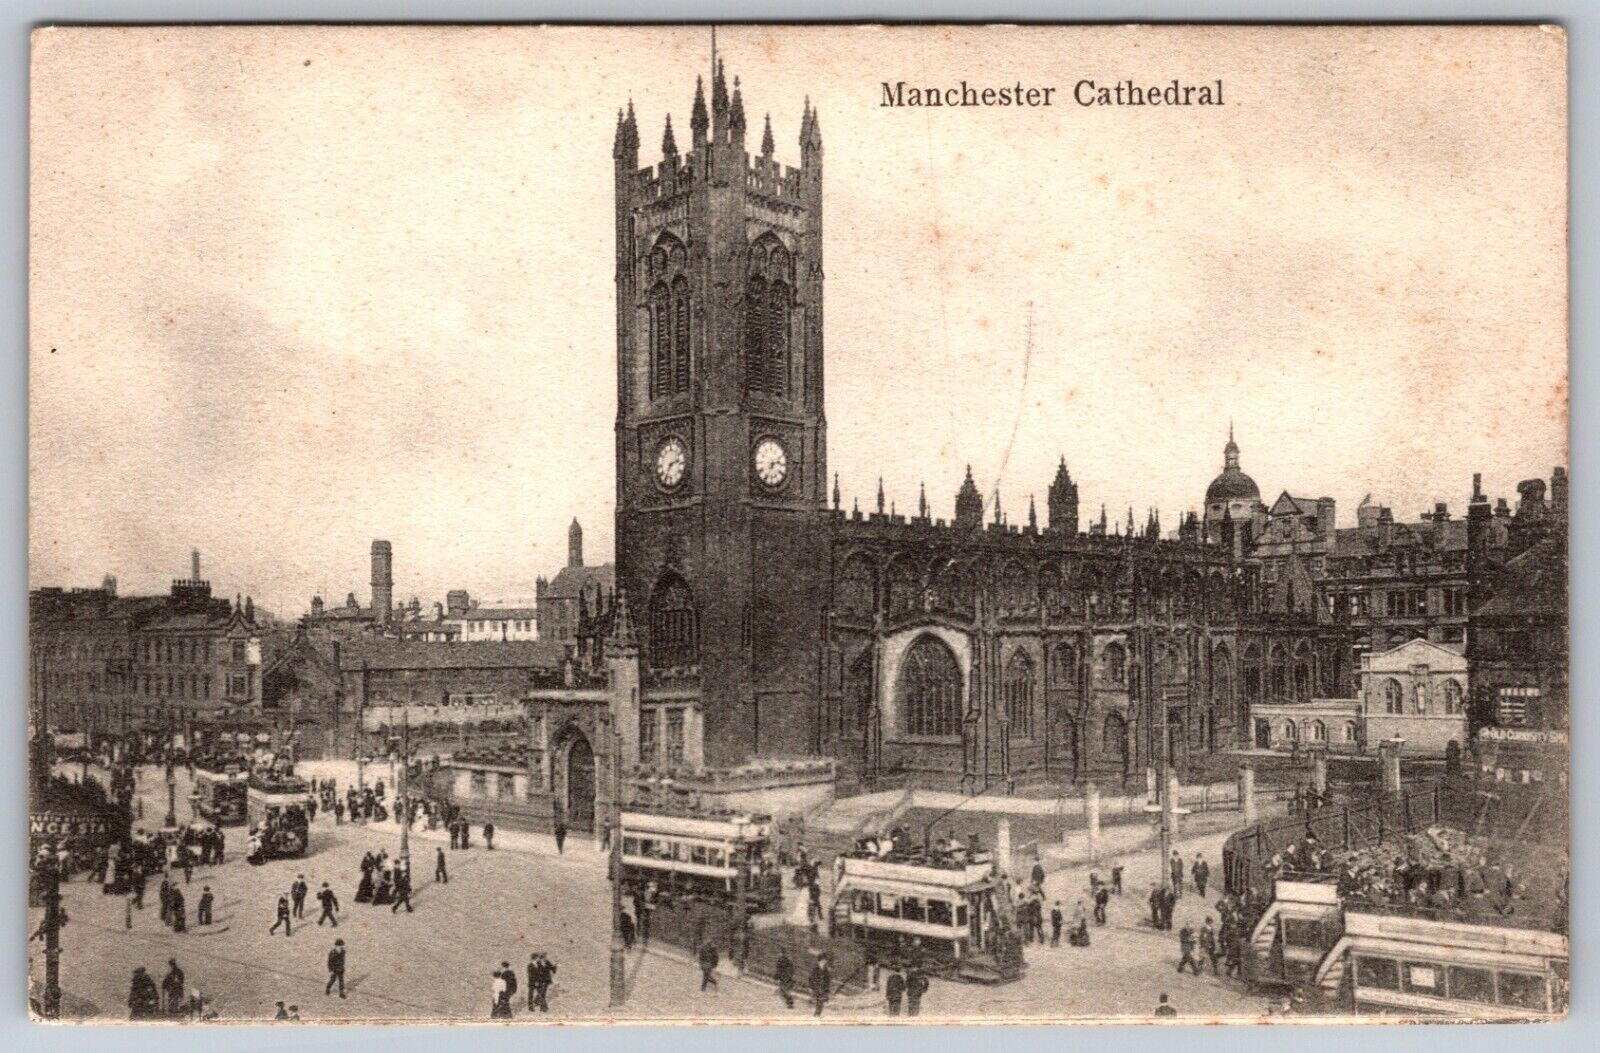 MANCHESTER CATHEDRAL 1915 PELHAM SERIES REAL PHOTO UK VINTAGE POSTCARD